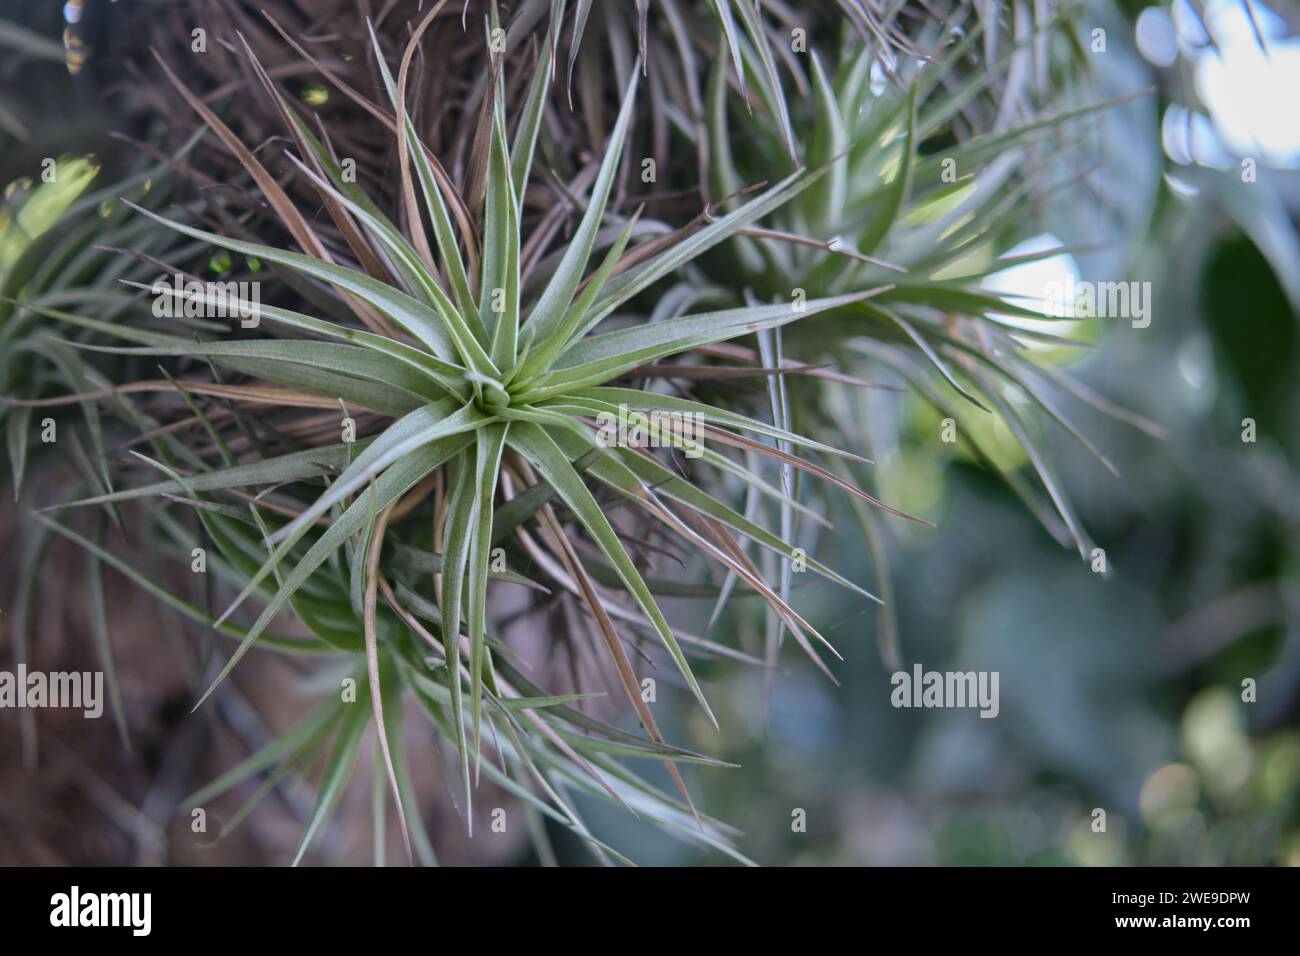 air plant with scientific name Tillandsia, isolated on wooden background. Stock Photo